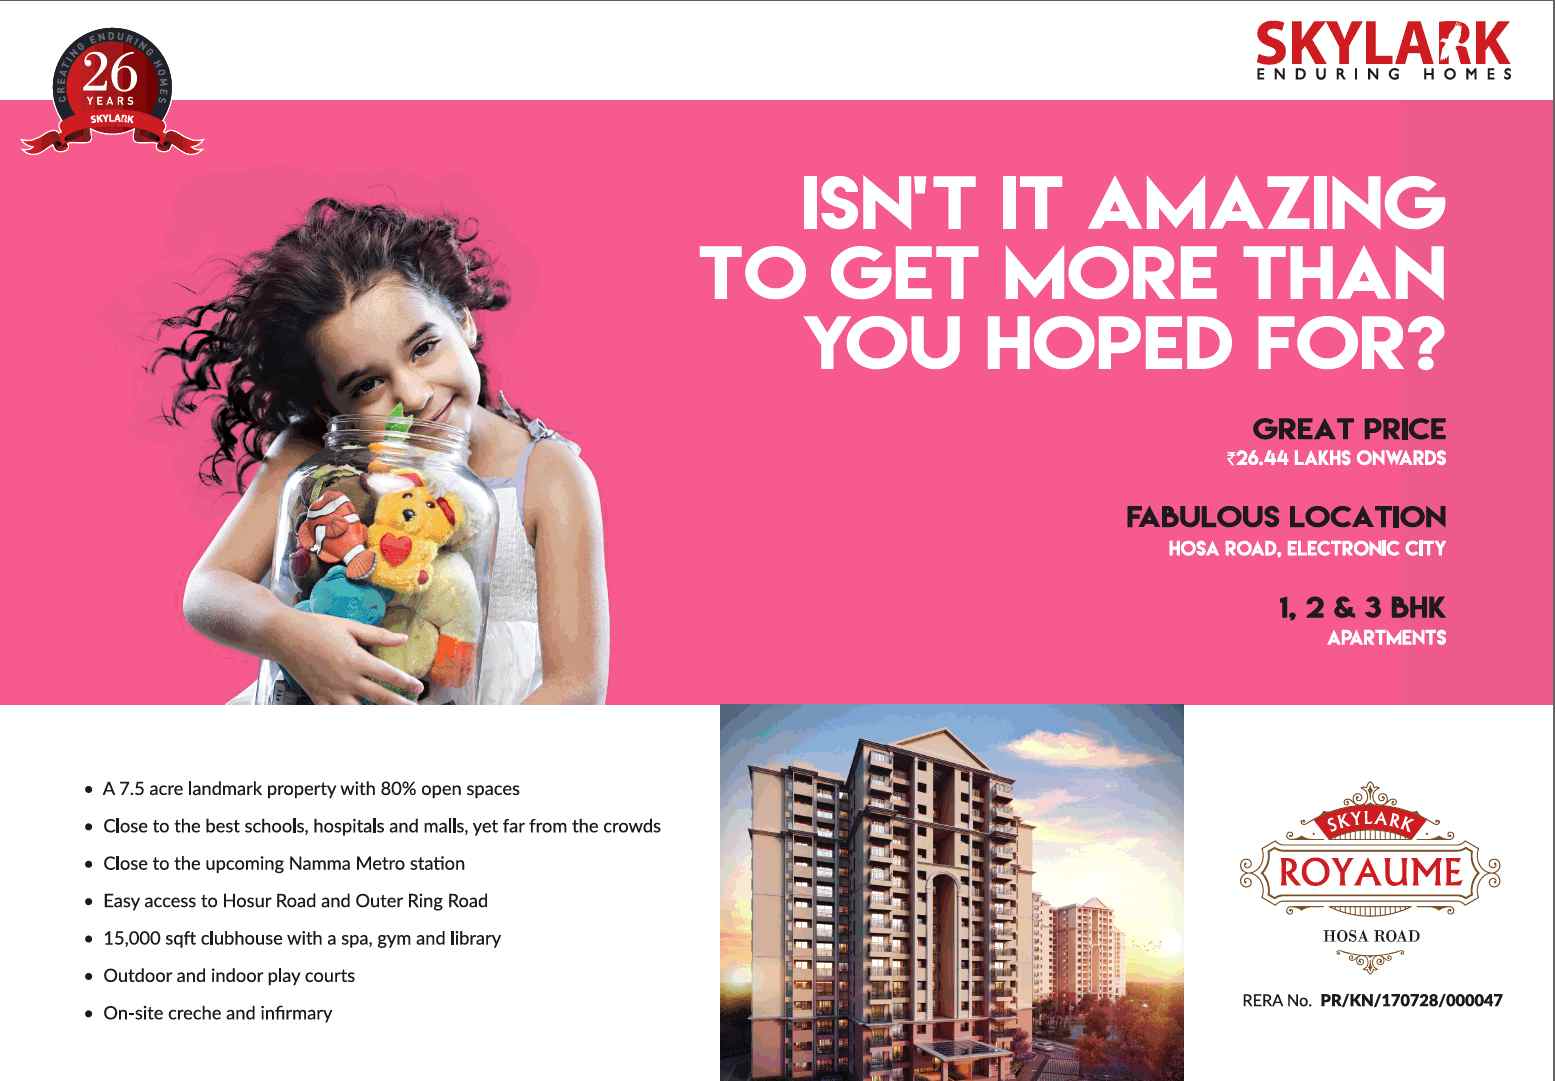 Book homes starting @ Rs. 26.44 Lacs at Skylark Royaume in Bangalore Update